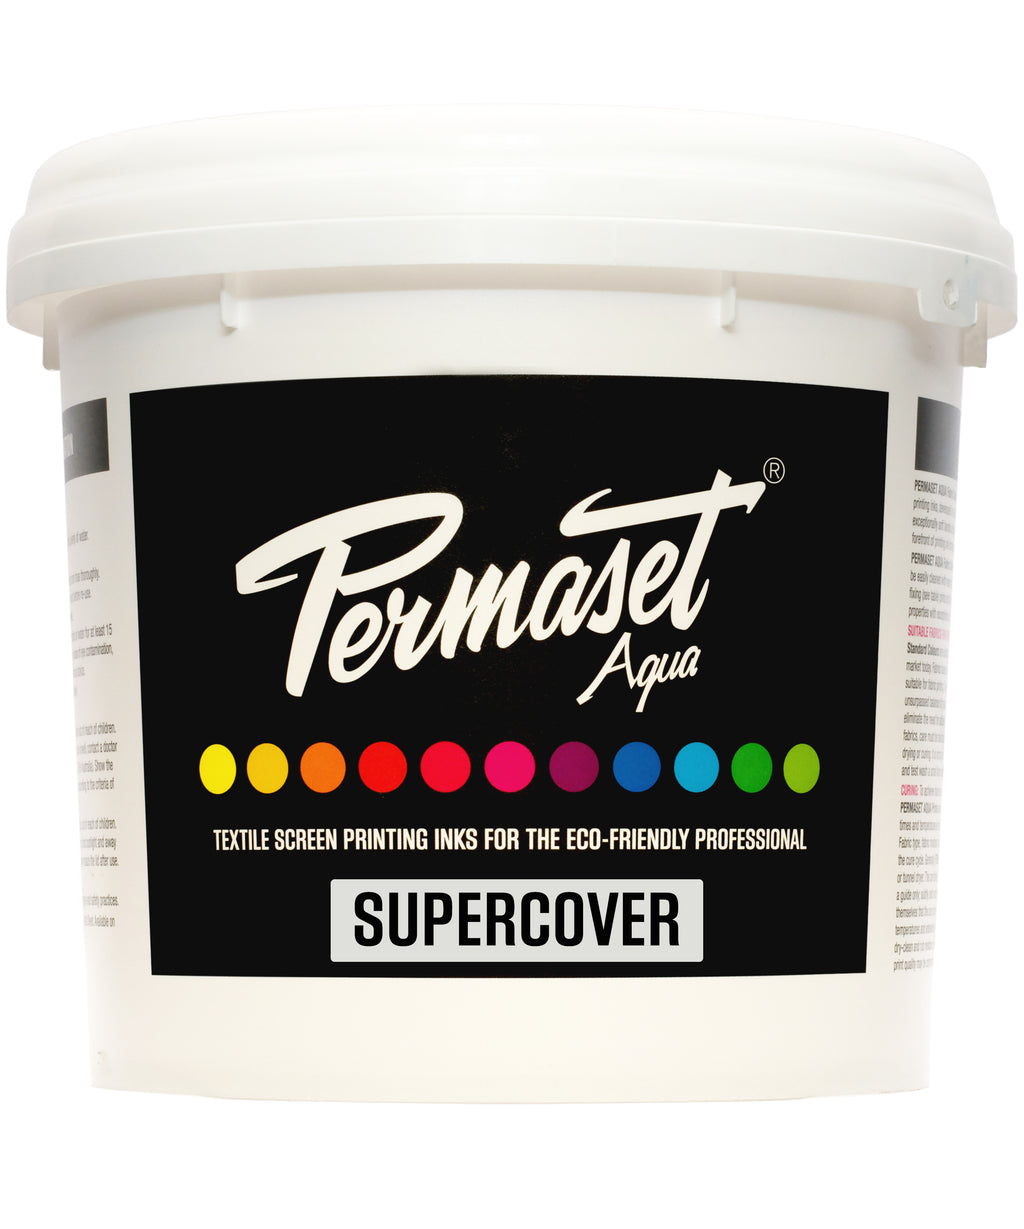 PERMASET SUPERCOVER water-based opaque screen printing inks for dark fabrics